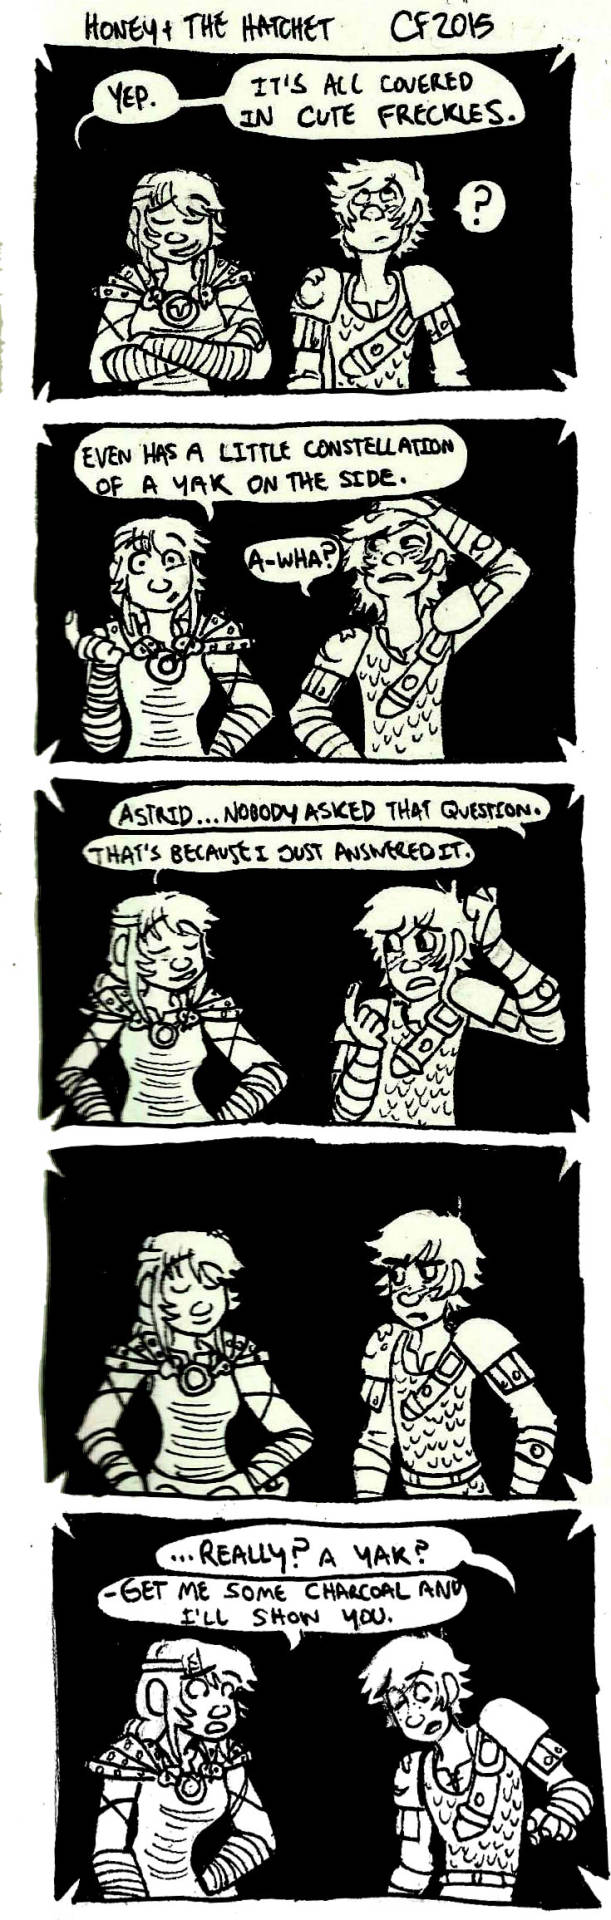 Honey and the hatchet httyd comic